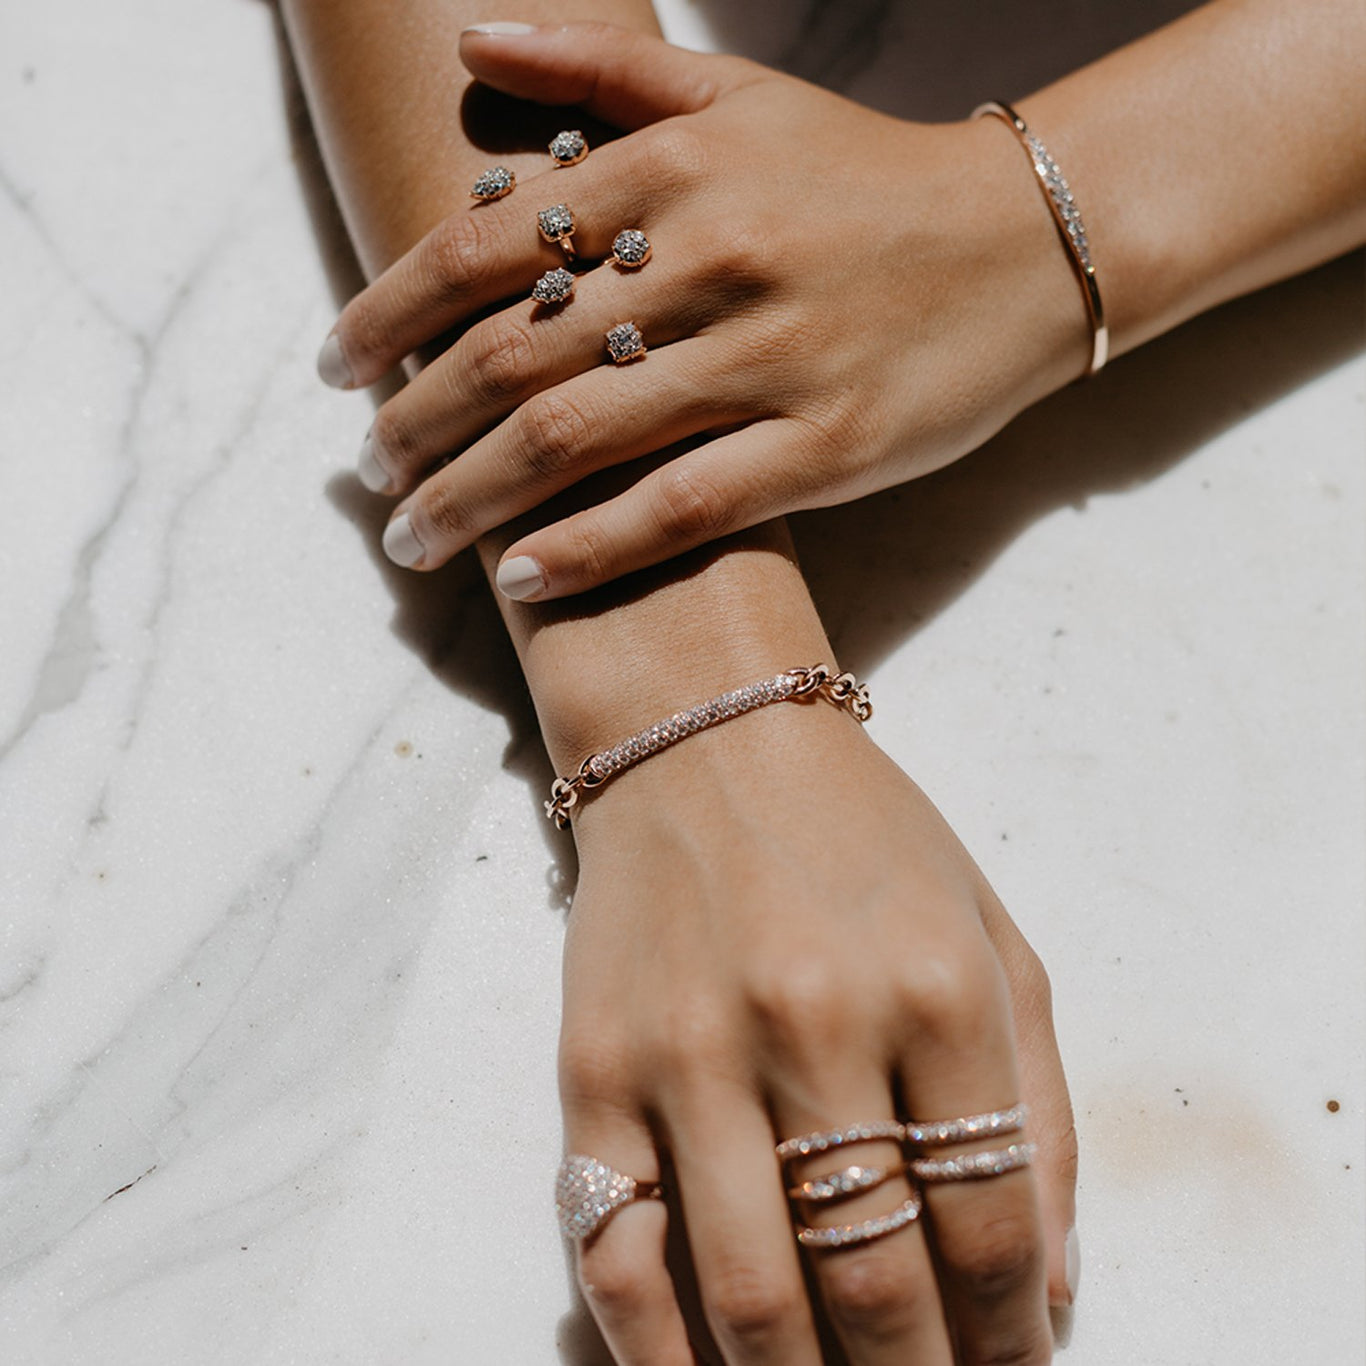 The Pantheon Bracelet shown in Rose Gold next to the Throne Rings on the Left hand.